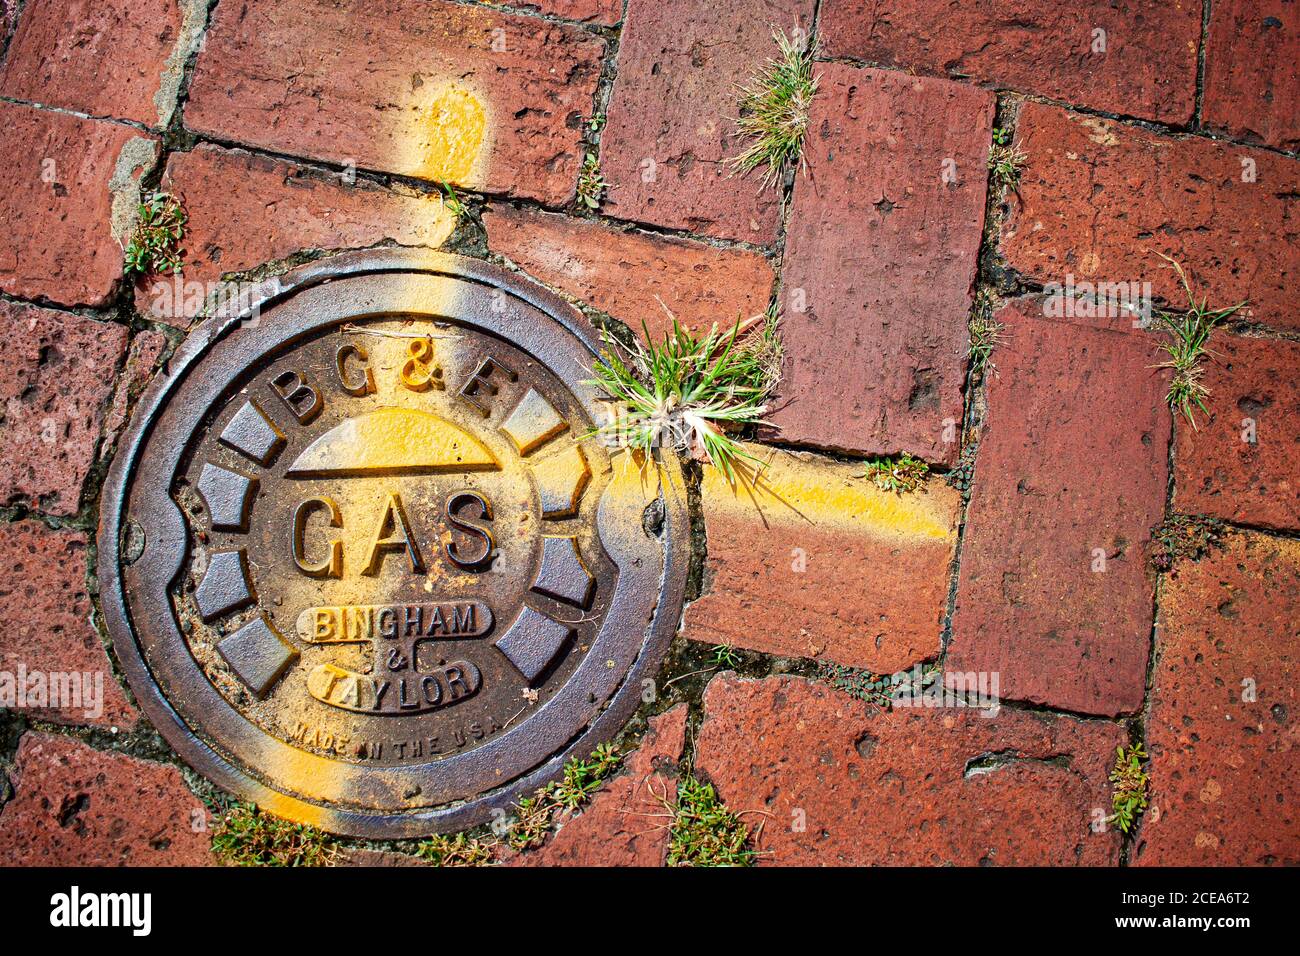 Annapolis, MD 08/21/2020: Close up image of a manhole cover belonging to Baltimore Gas and Electric Company. The heavy duty metal cover is on top of a Stock Photo